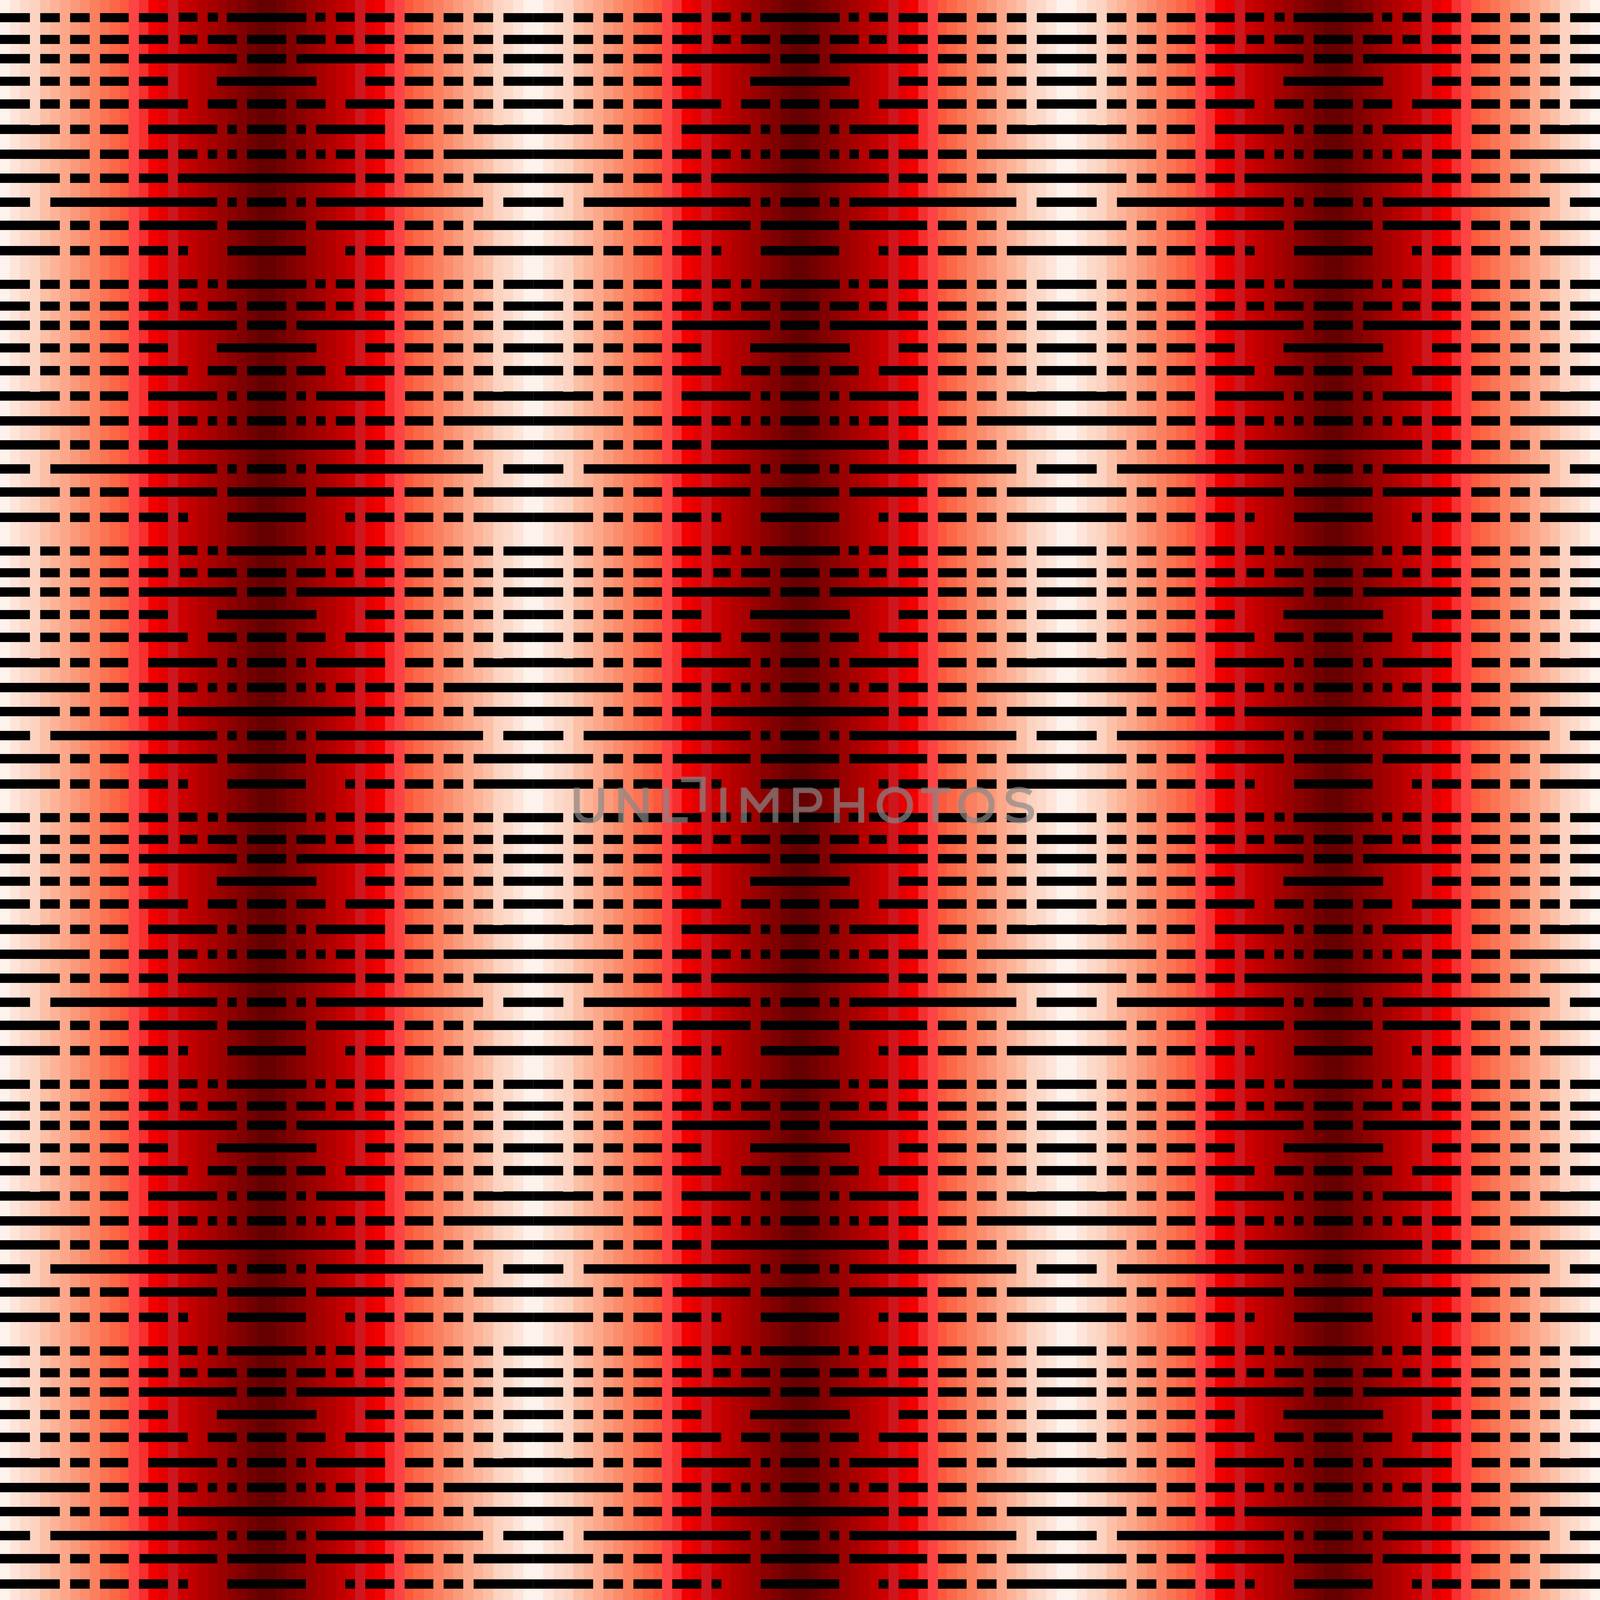 Crossing horizontal and vertical lines. Striped modern background. No gradient